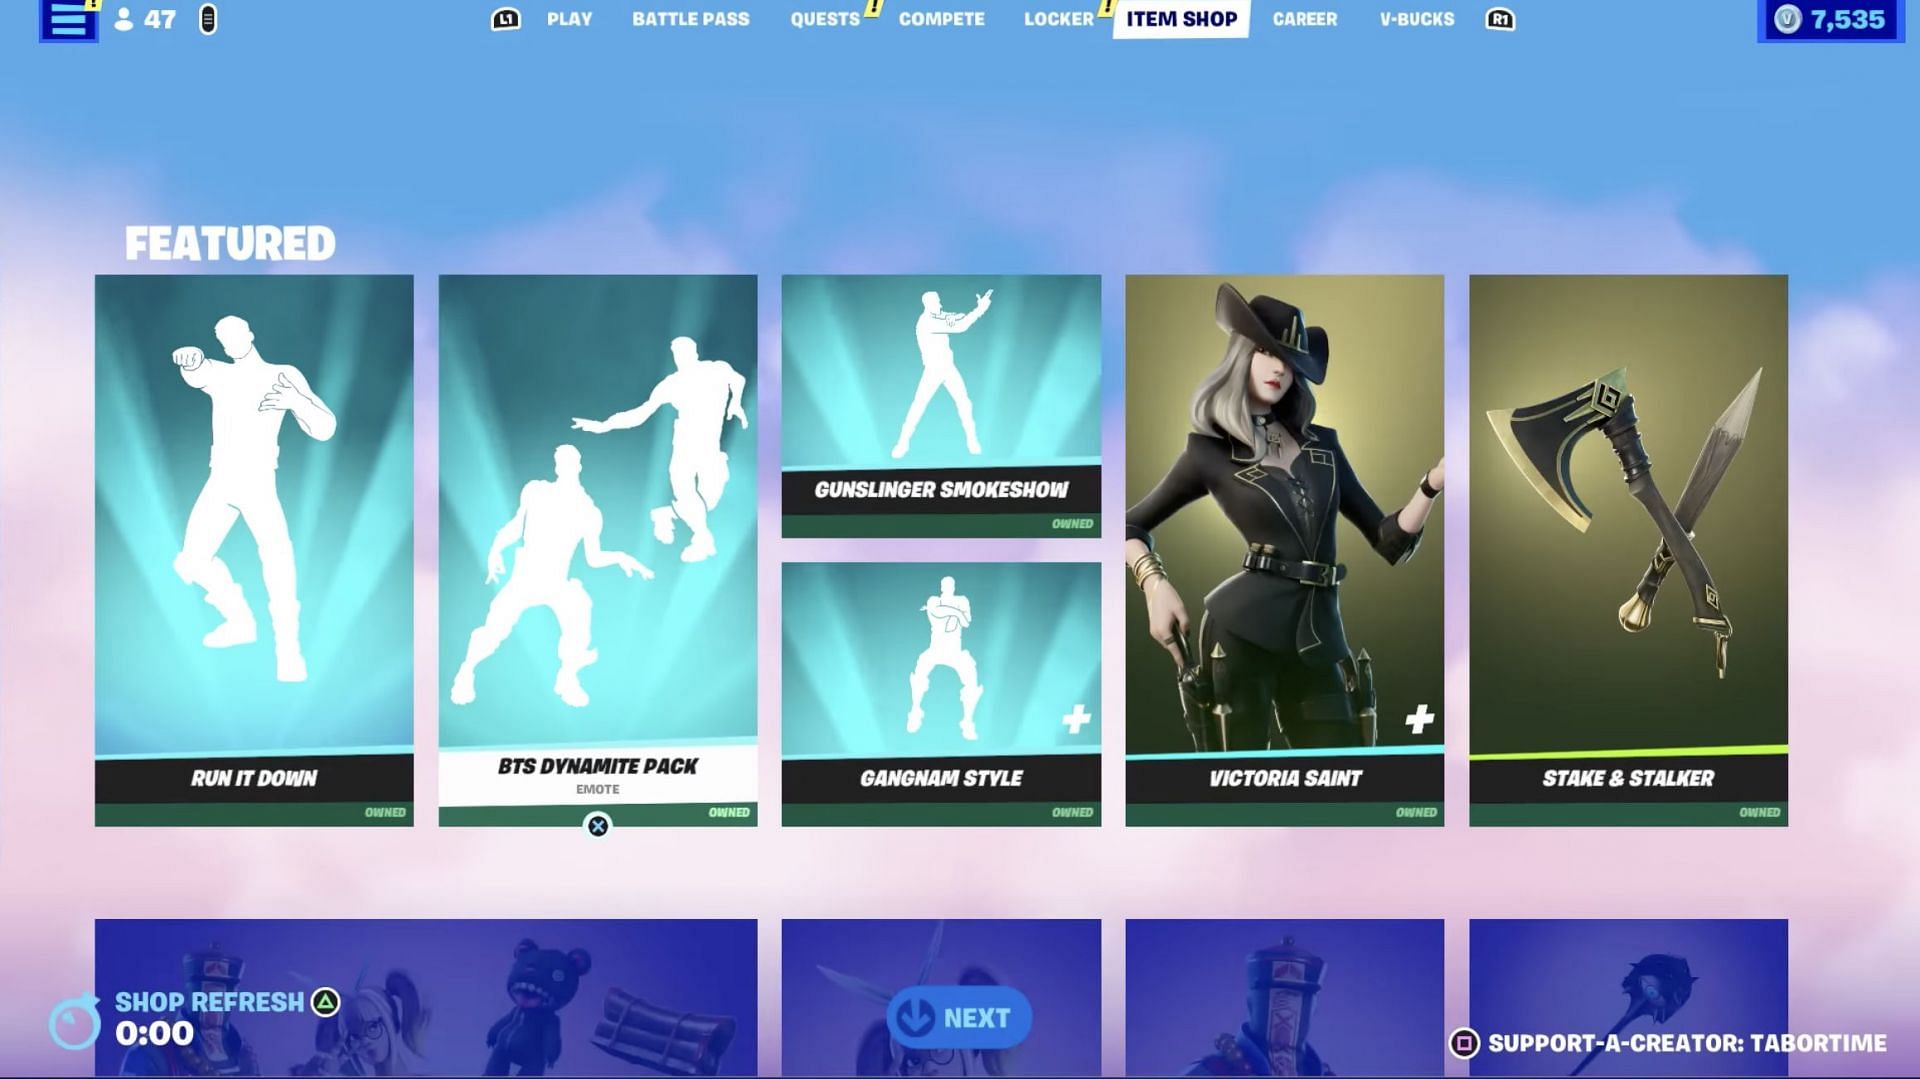 Go to the Item Shop to find any available cosmetics (Image via Tabor Hill on YouTube)